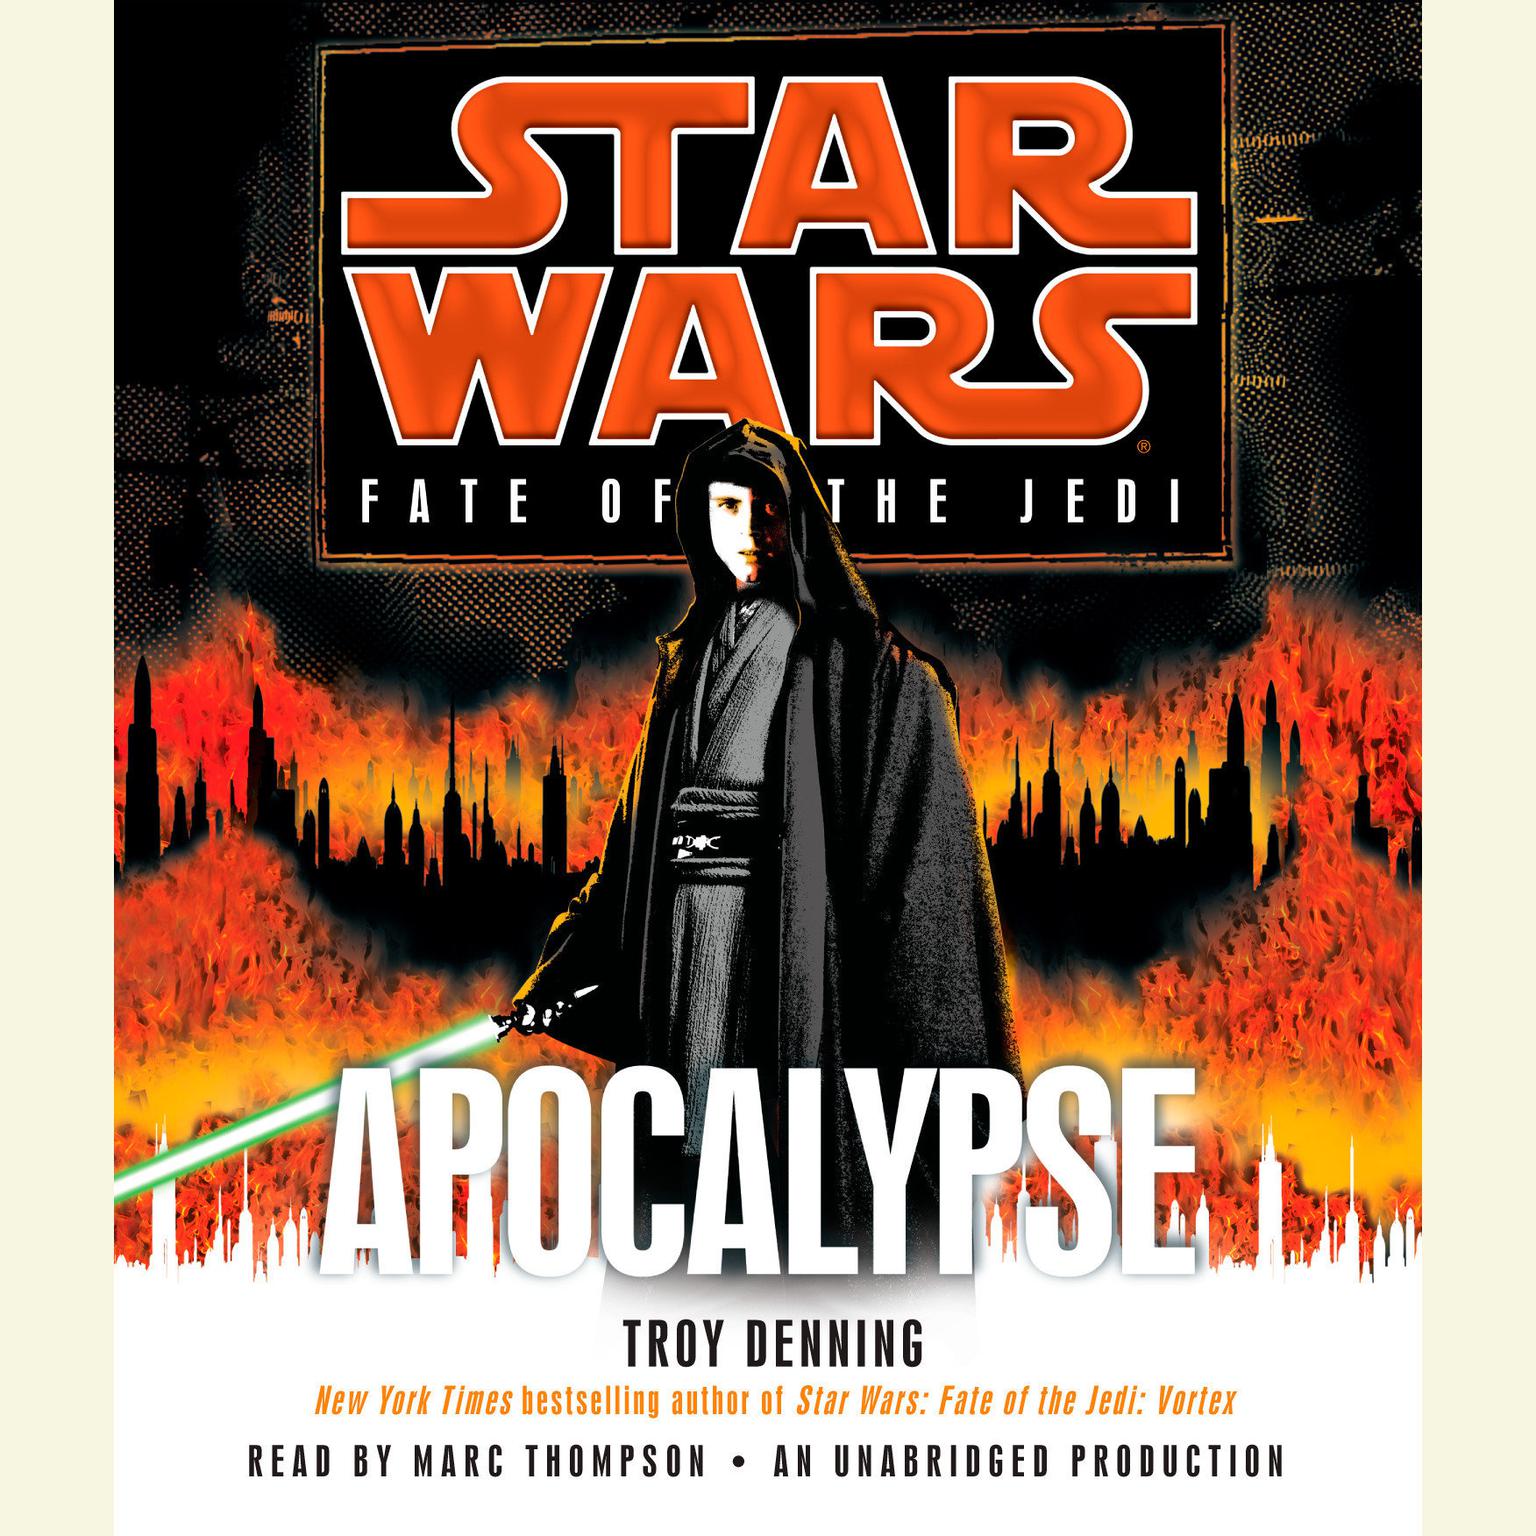 Apocalypse: Star Wars Legends (Fate of the Jedi) Audiobook, by Troy Denning